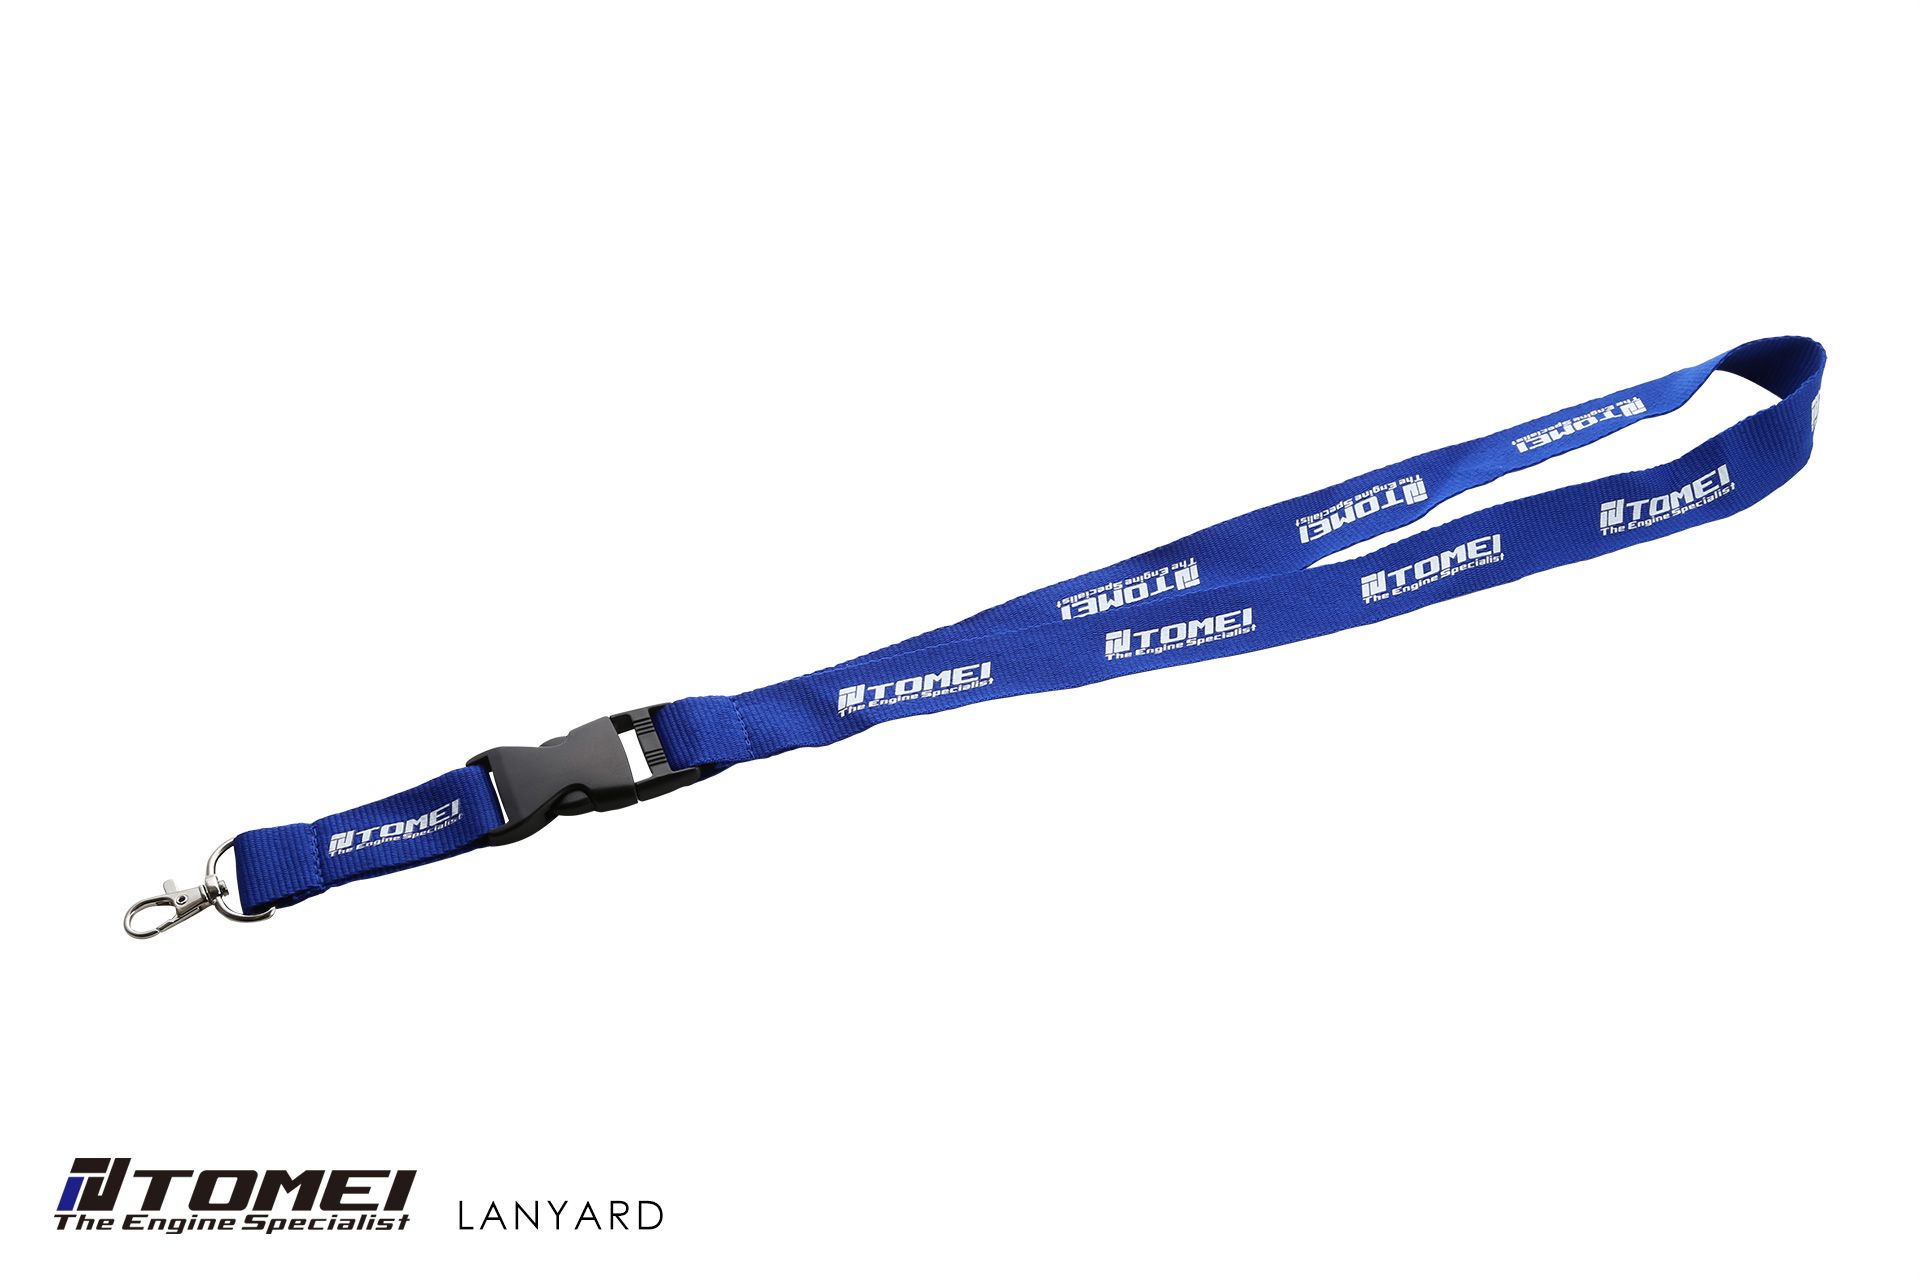 Tomei Polyester Lanyard w/ Black & White Print 2017, Quick Release Buckle, Lobster Claw Attachment, Blue 20"x1"